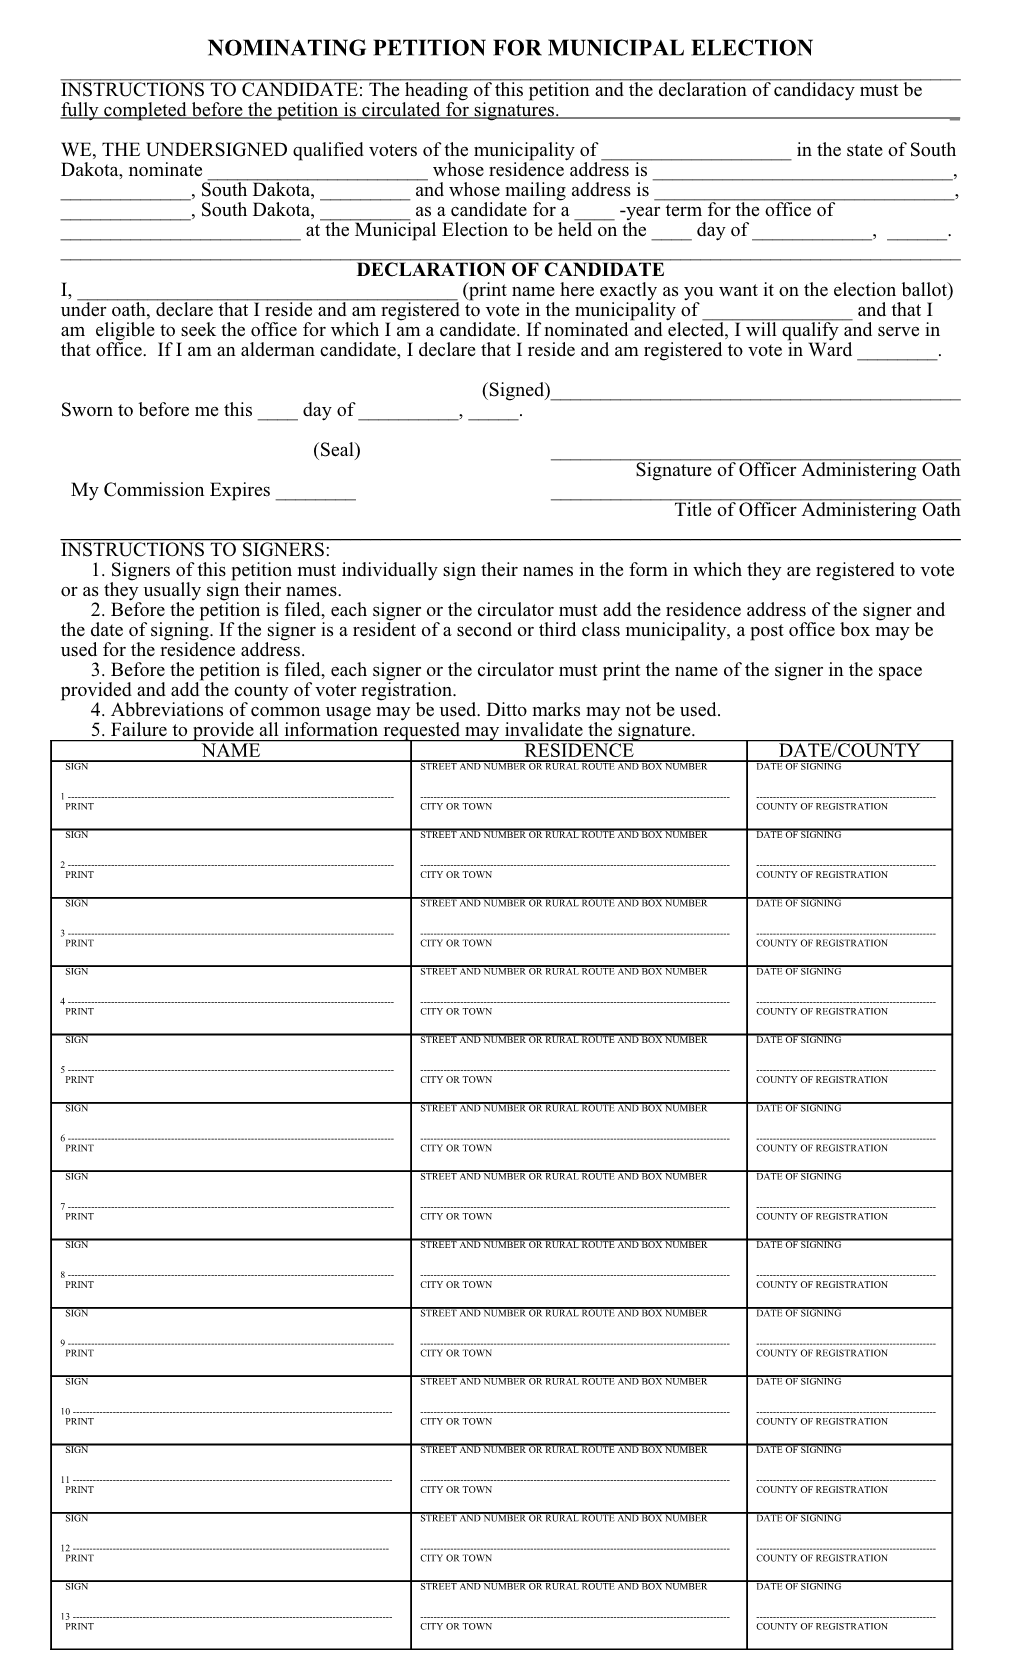 Nominating Petition for Municipal Election